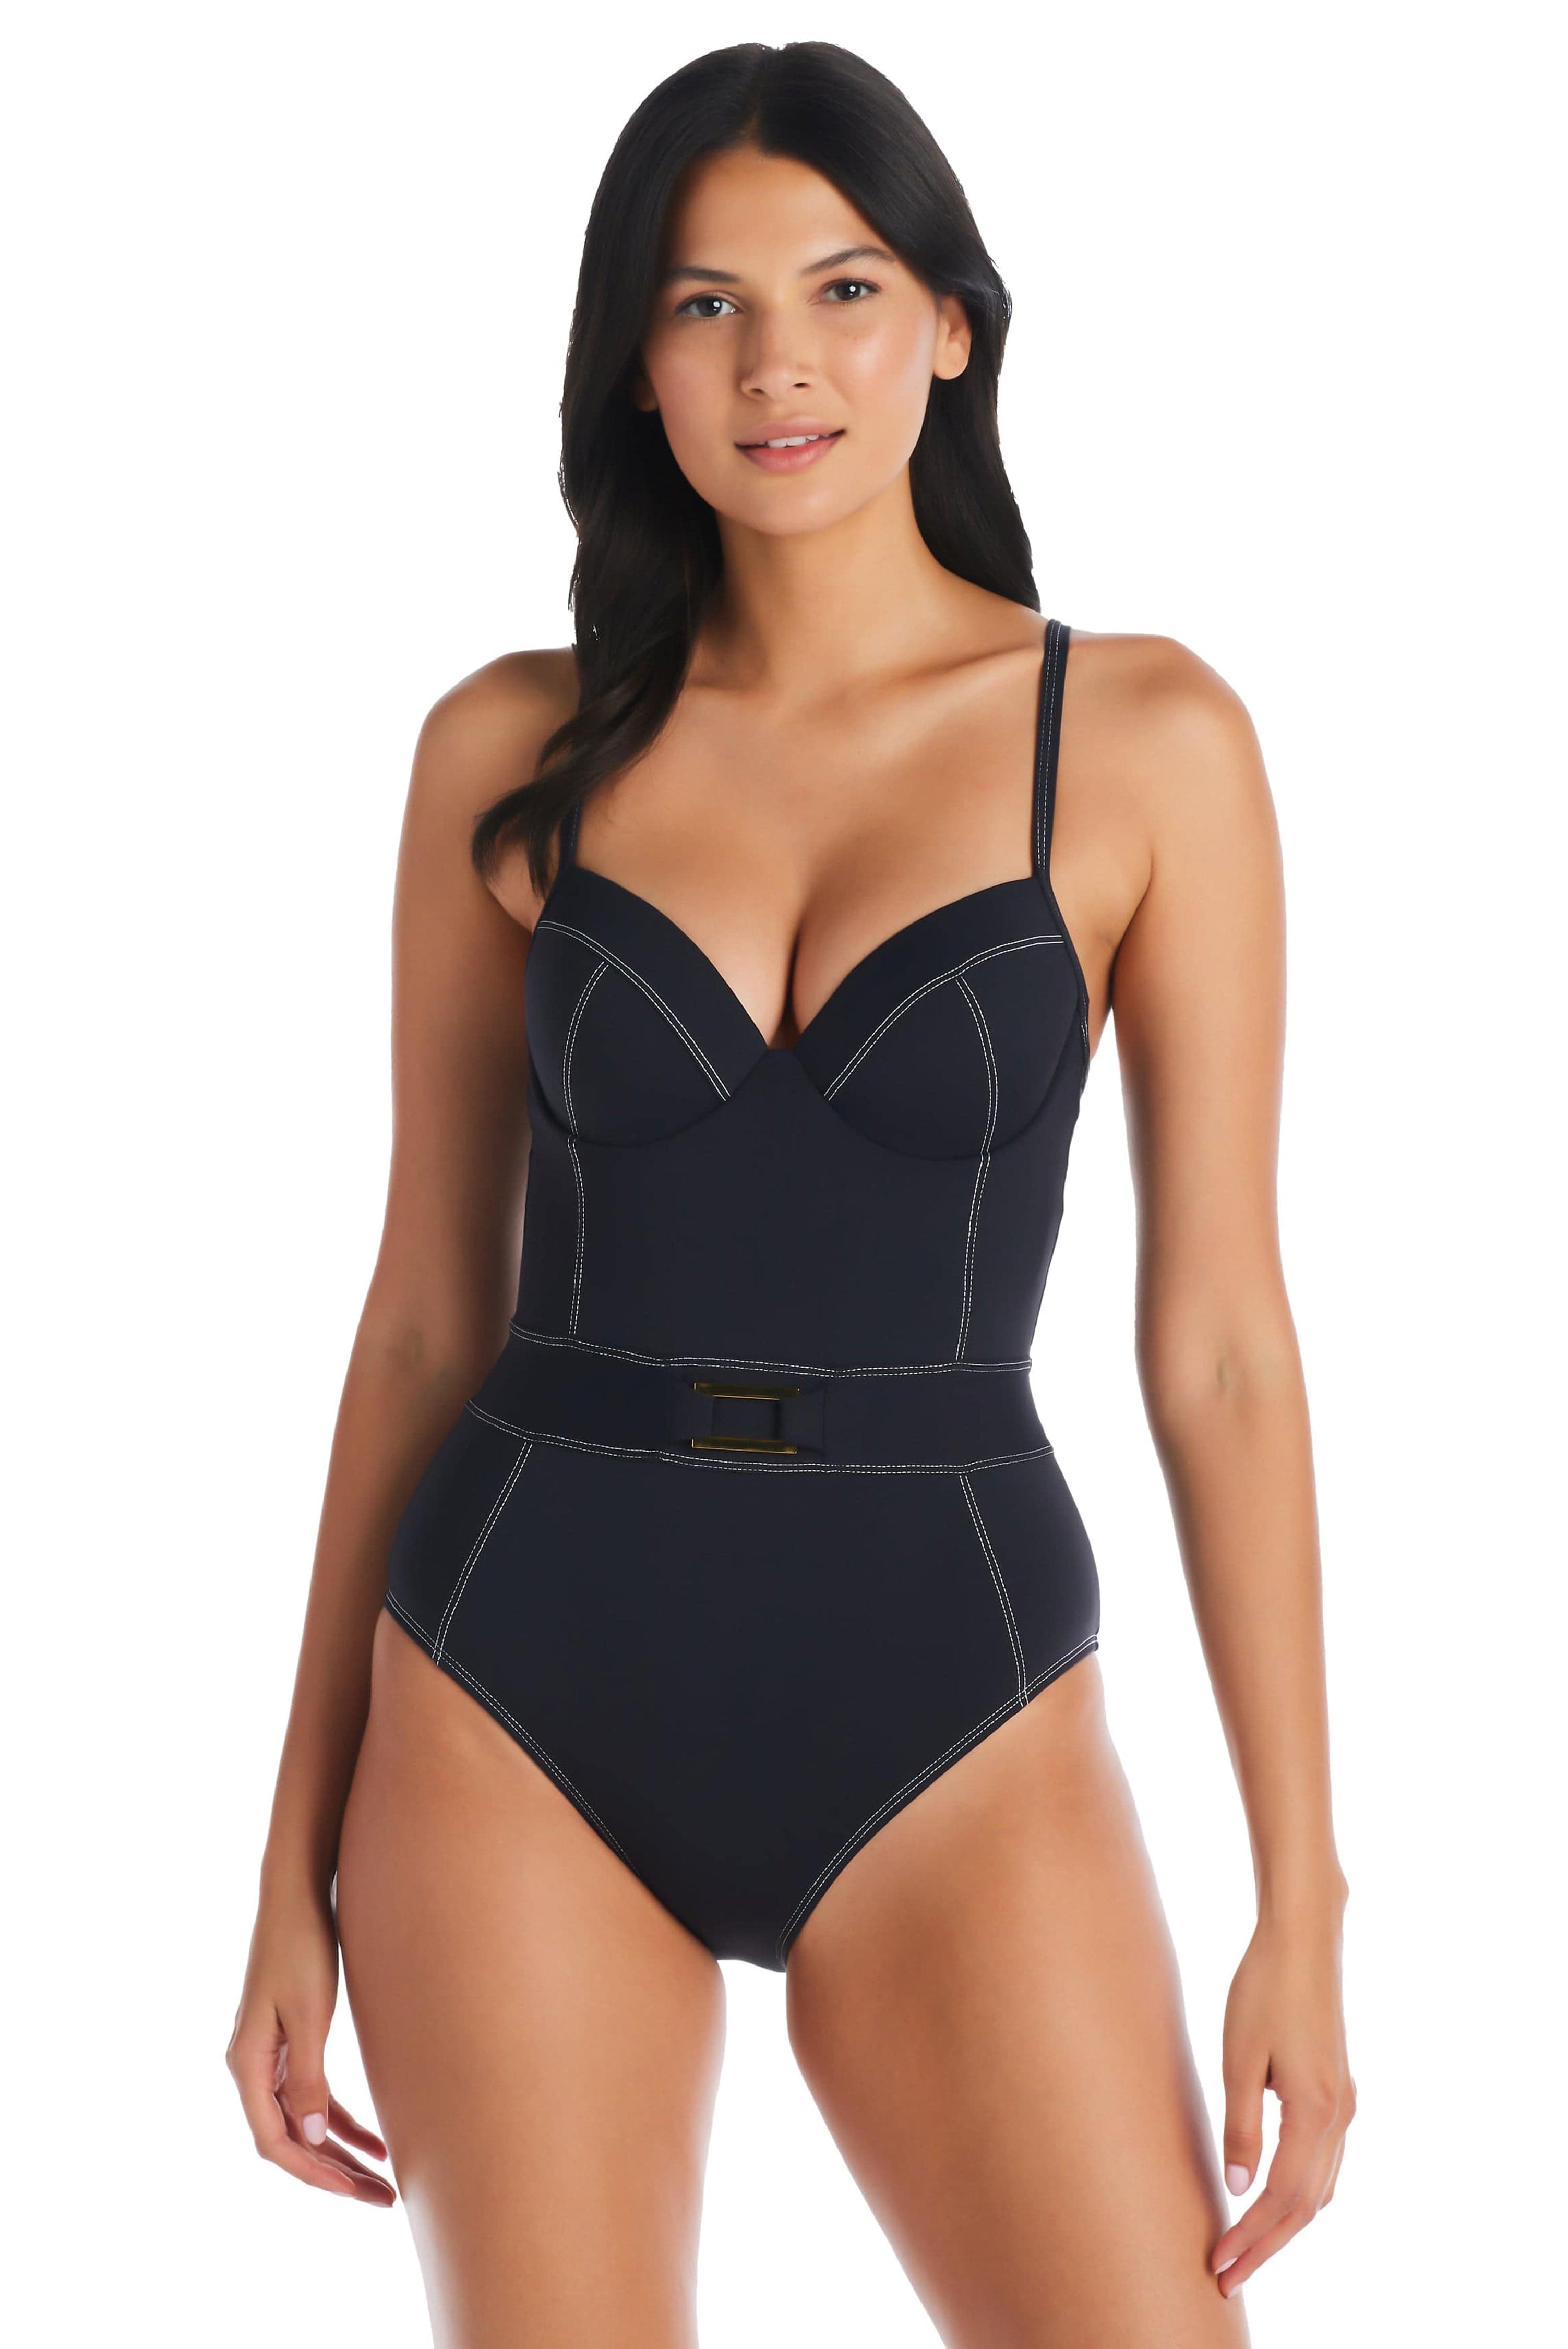 Bleu Rod Beattie Don't Mesh With Me High Neck One Piece Swimsuit   Green And Black - Soma